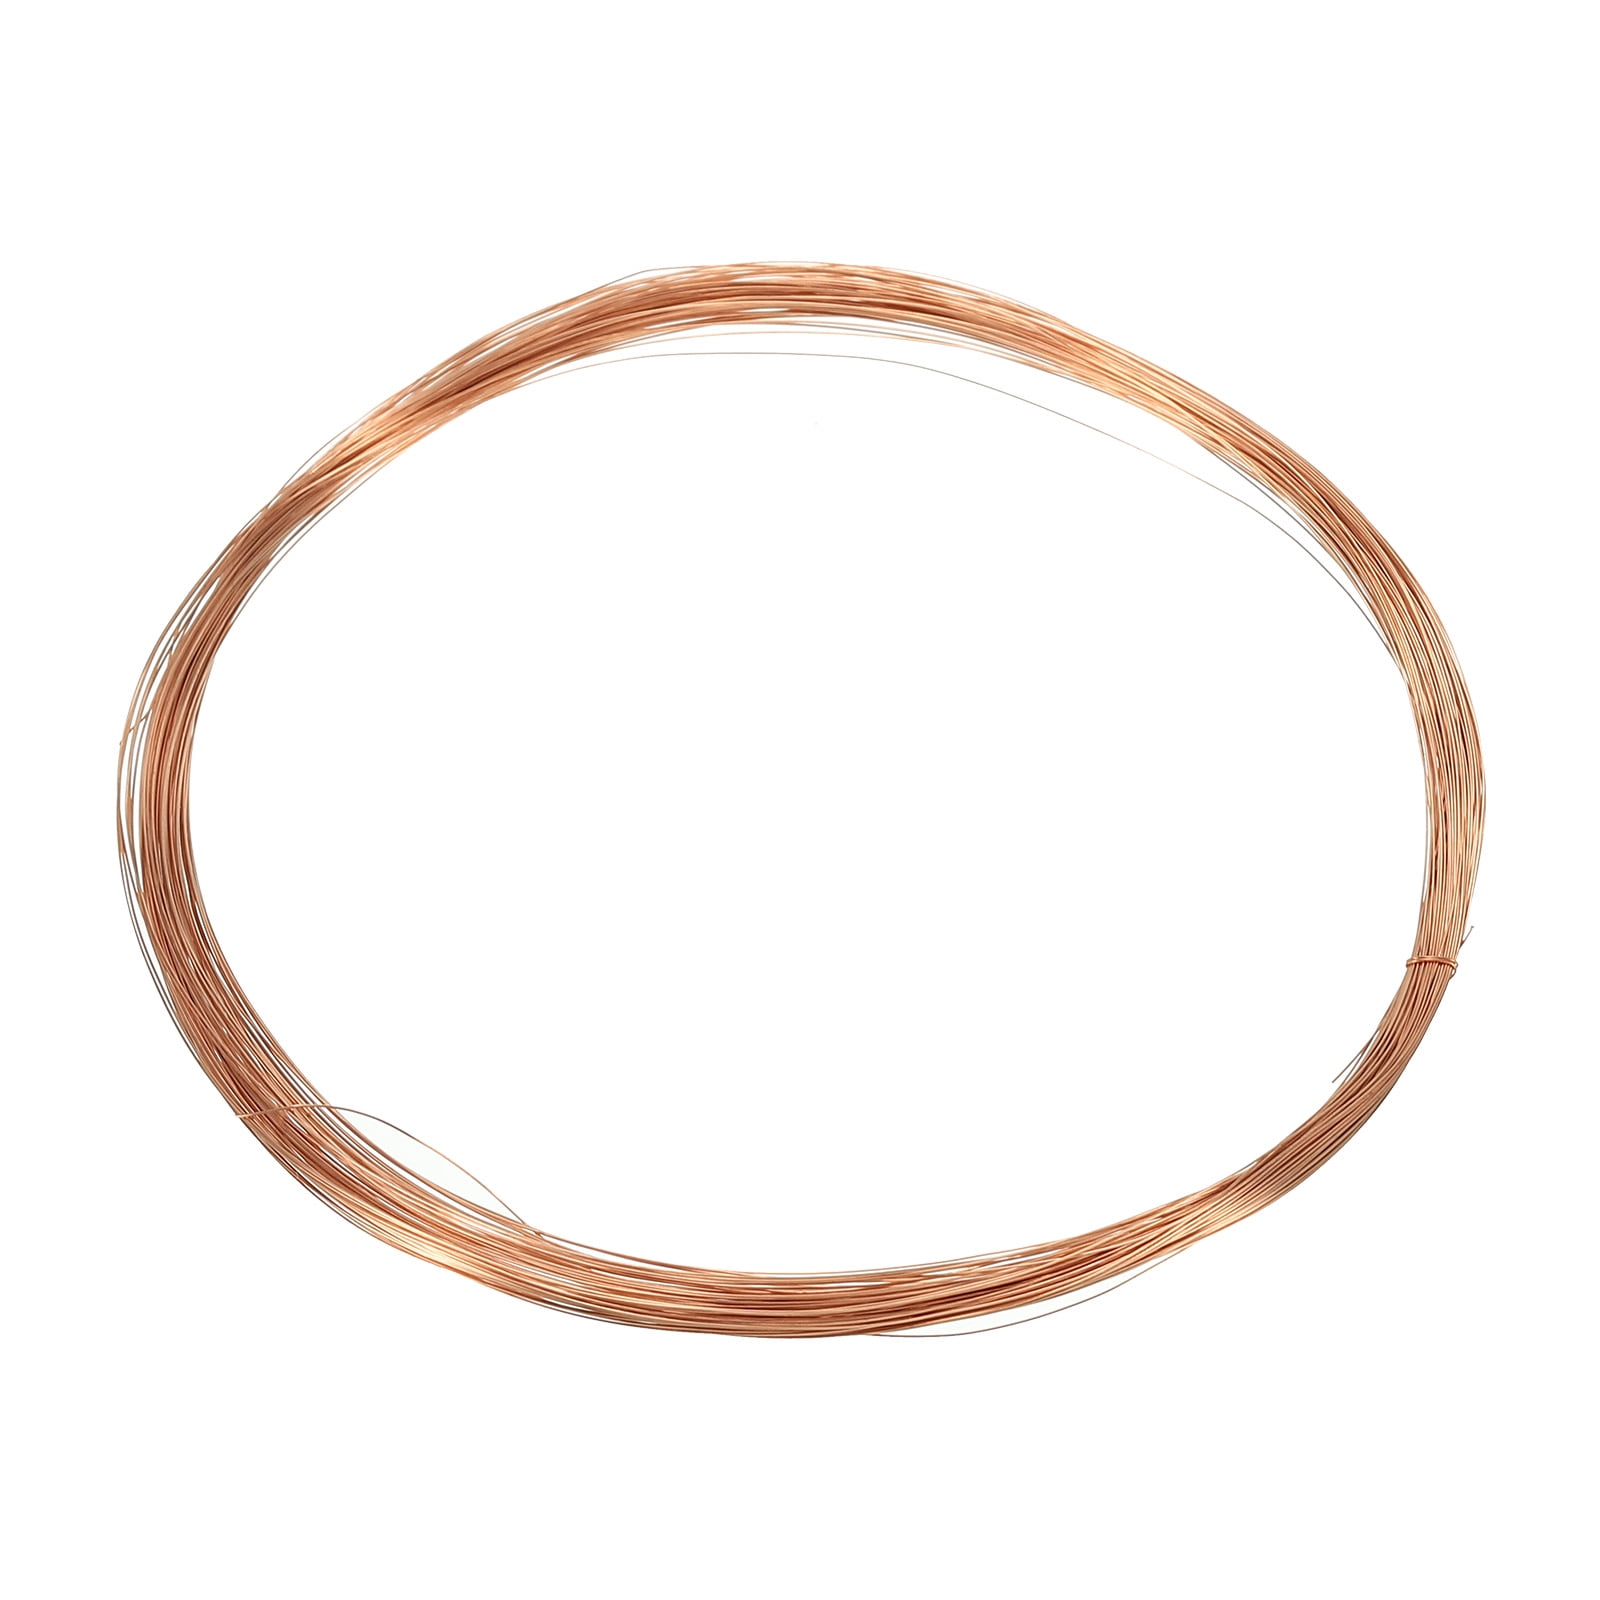 Uxcell 49 Feet Solid Bare Copper Wire 36 Gauge 99.9% Pure Copper Wire 0.2mm  Soft Beading Wire